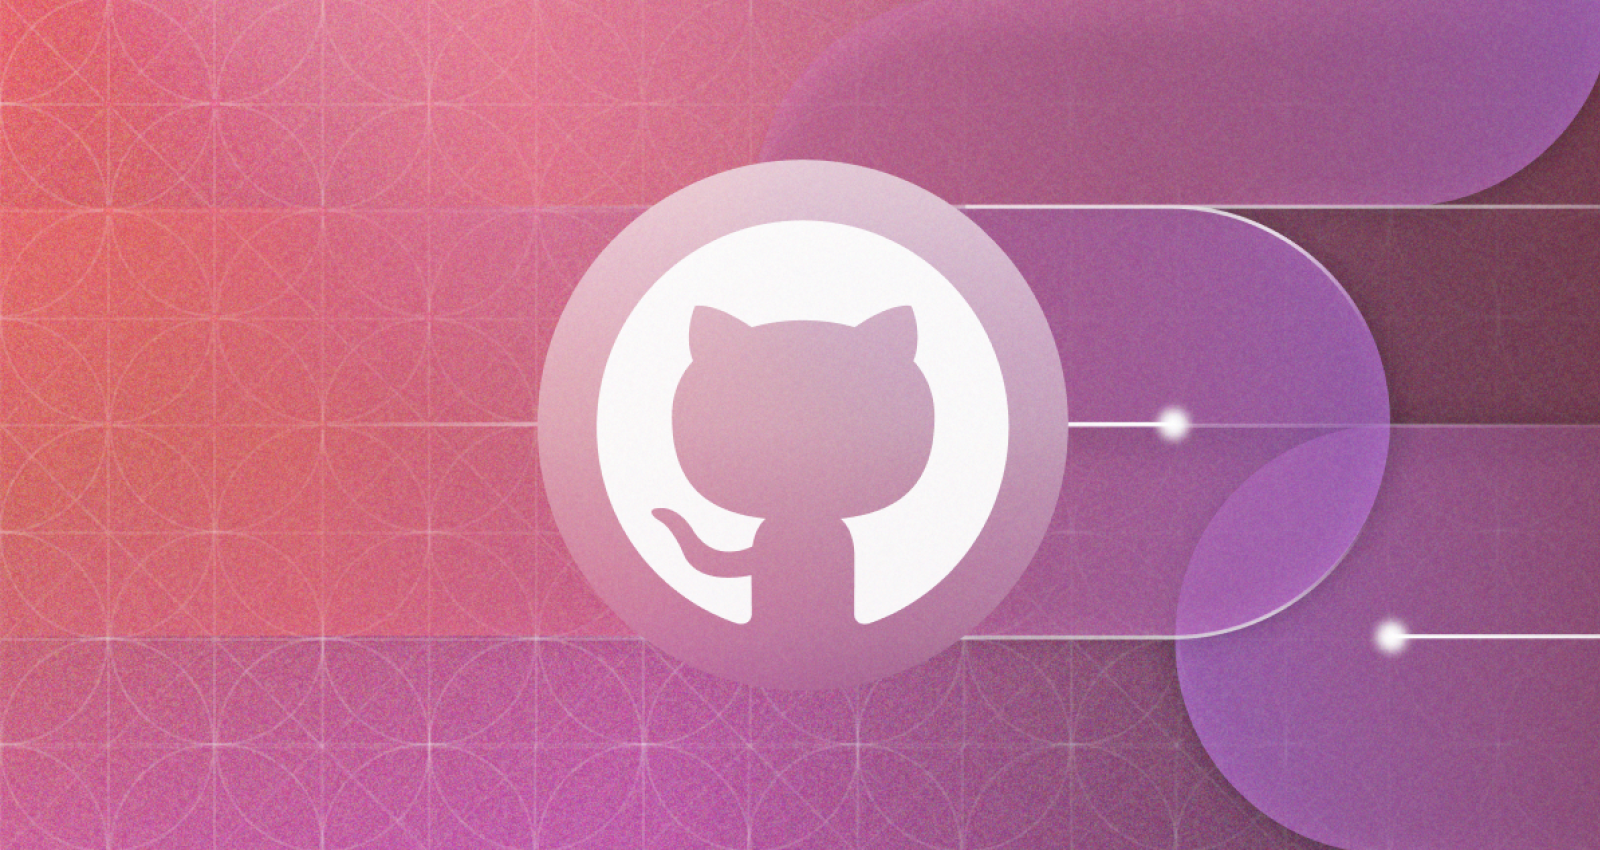 Transform your software engineering practices with GitHub Enterprise